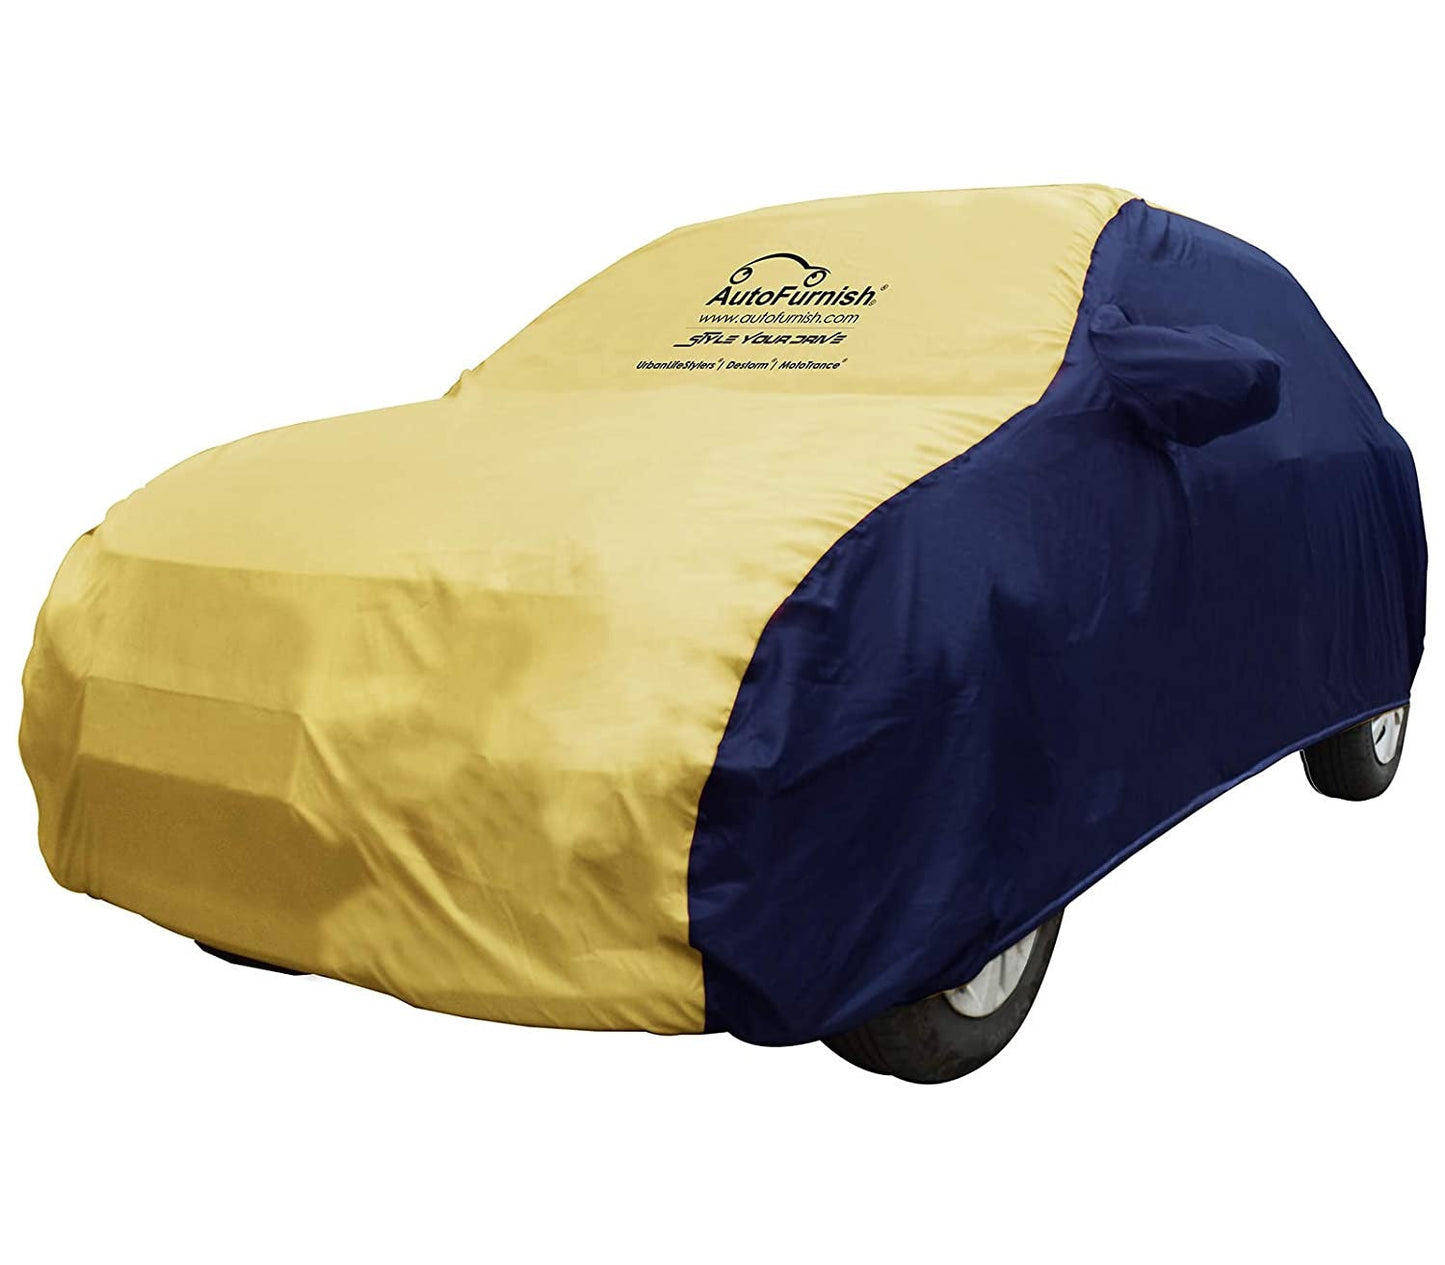 Hyundai Creta (2020-2022) Car Body Cover, Triple Stitched, Heat & Water Resistant with Side Mirror Pockets (SPORTY Series)